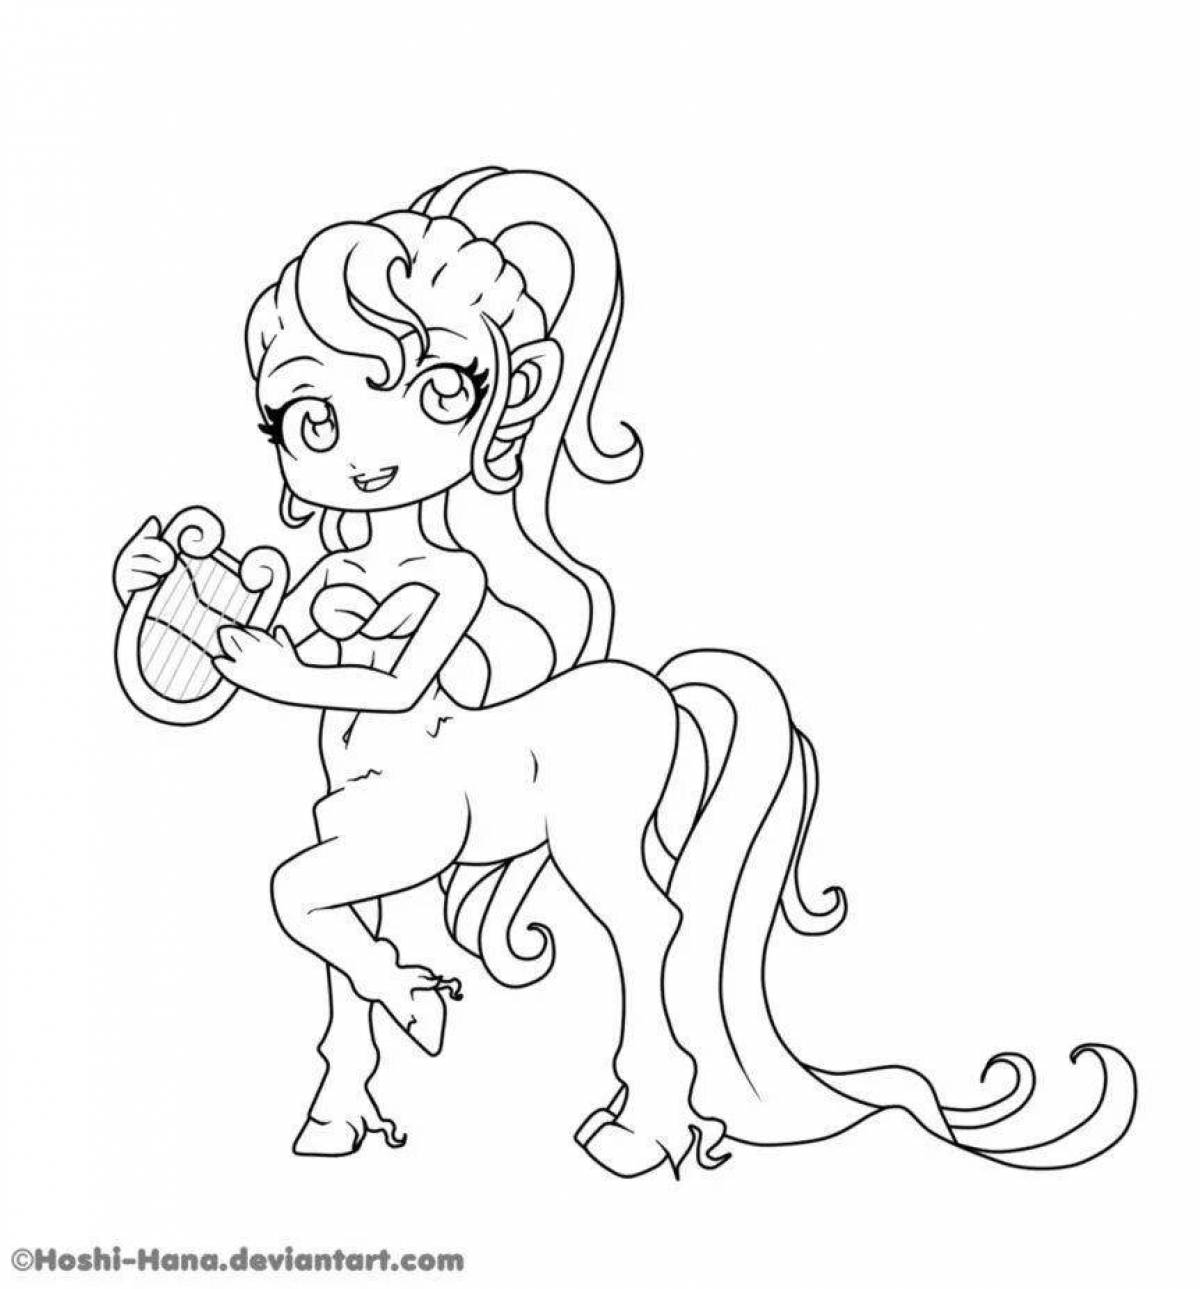 Charming centaur coloring book for kids